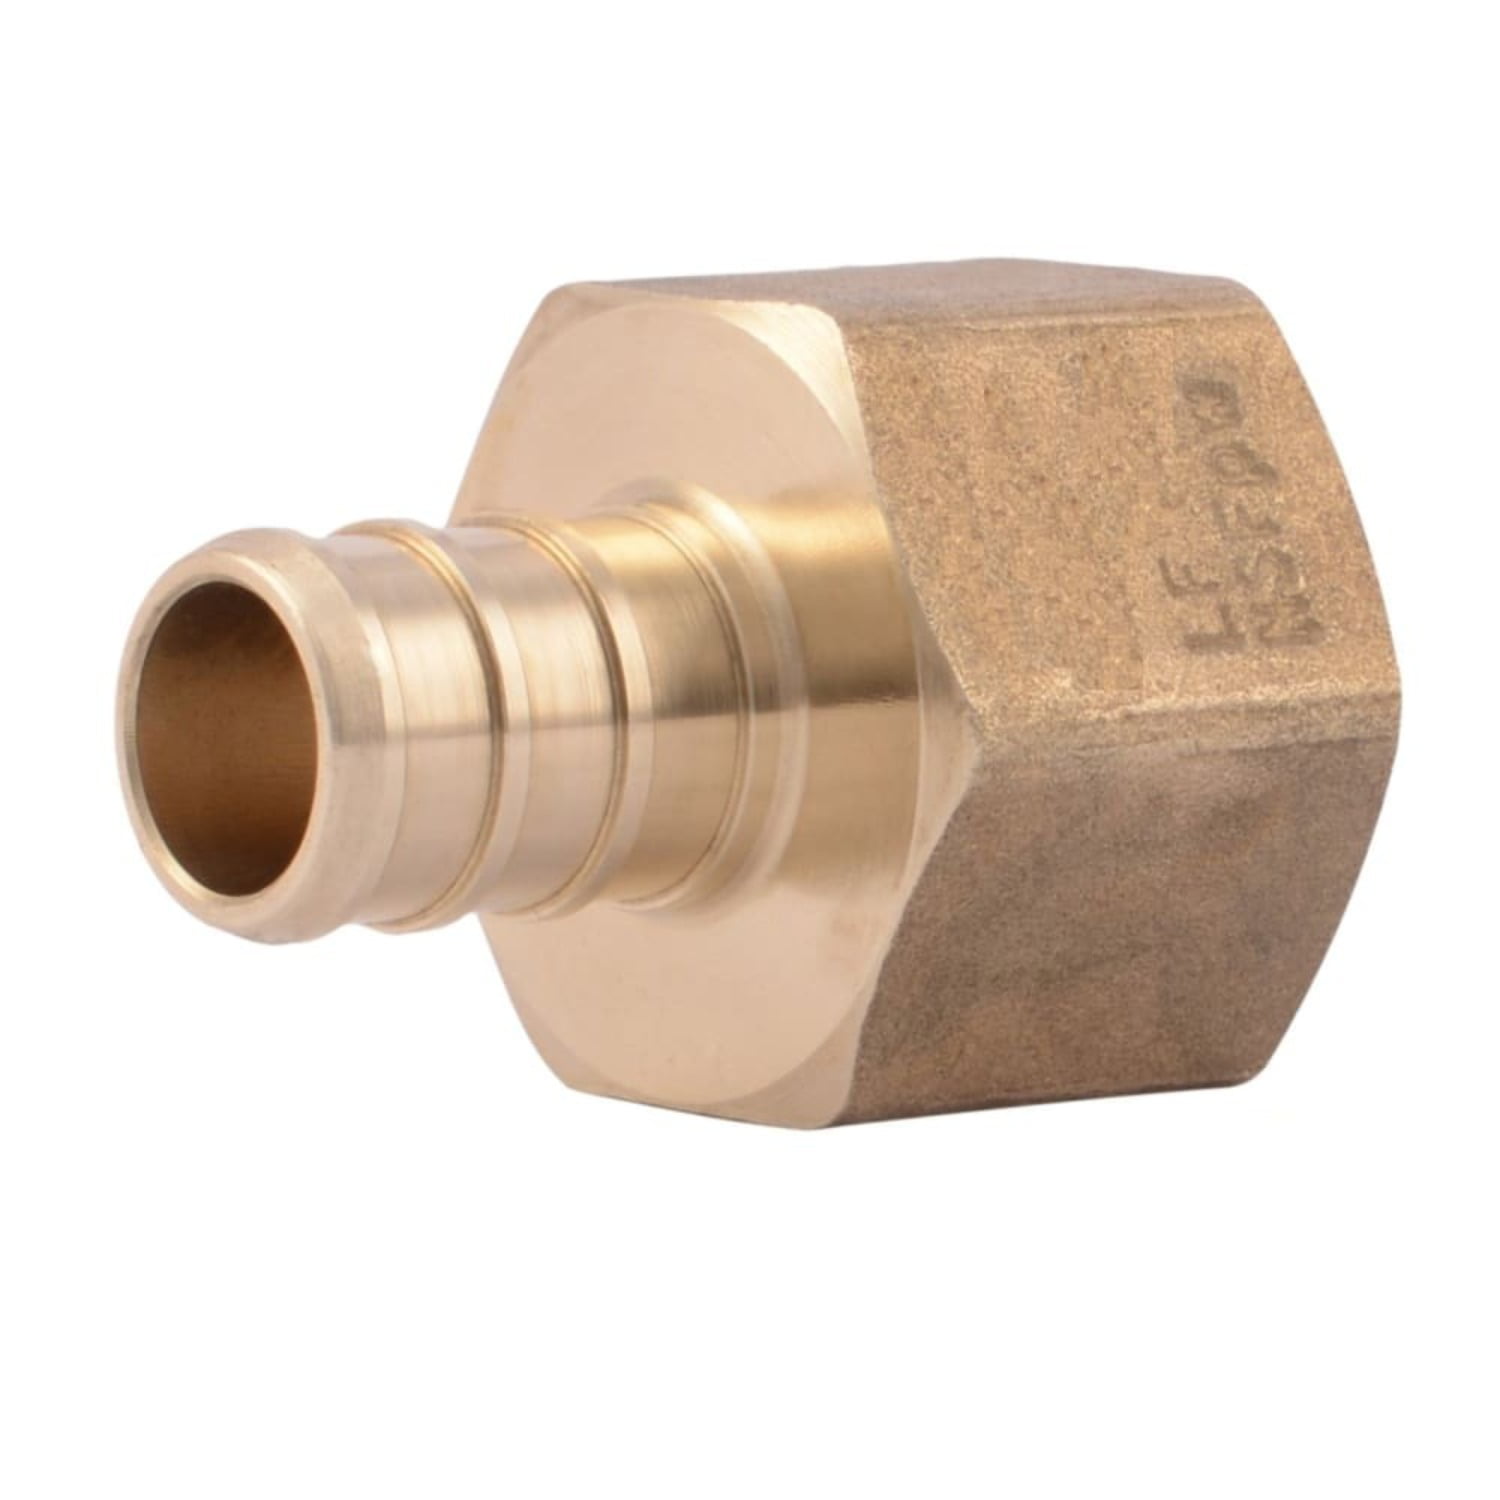 1/2" PEX x 3/4" MPT Threaded Adapter Brass Crimping Fittings Lead Free 10 